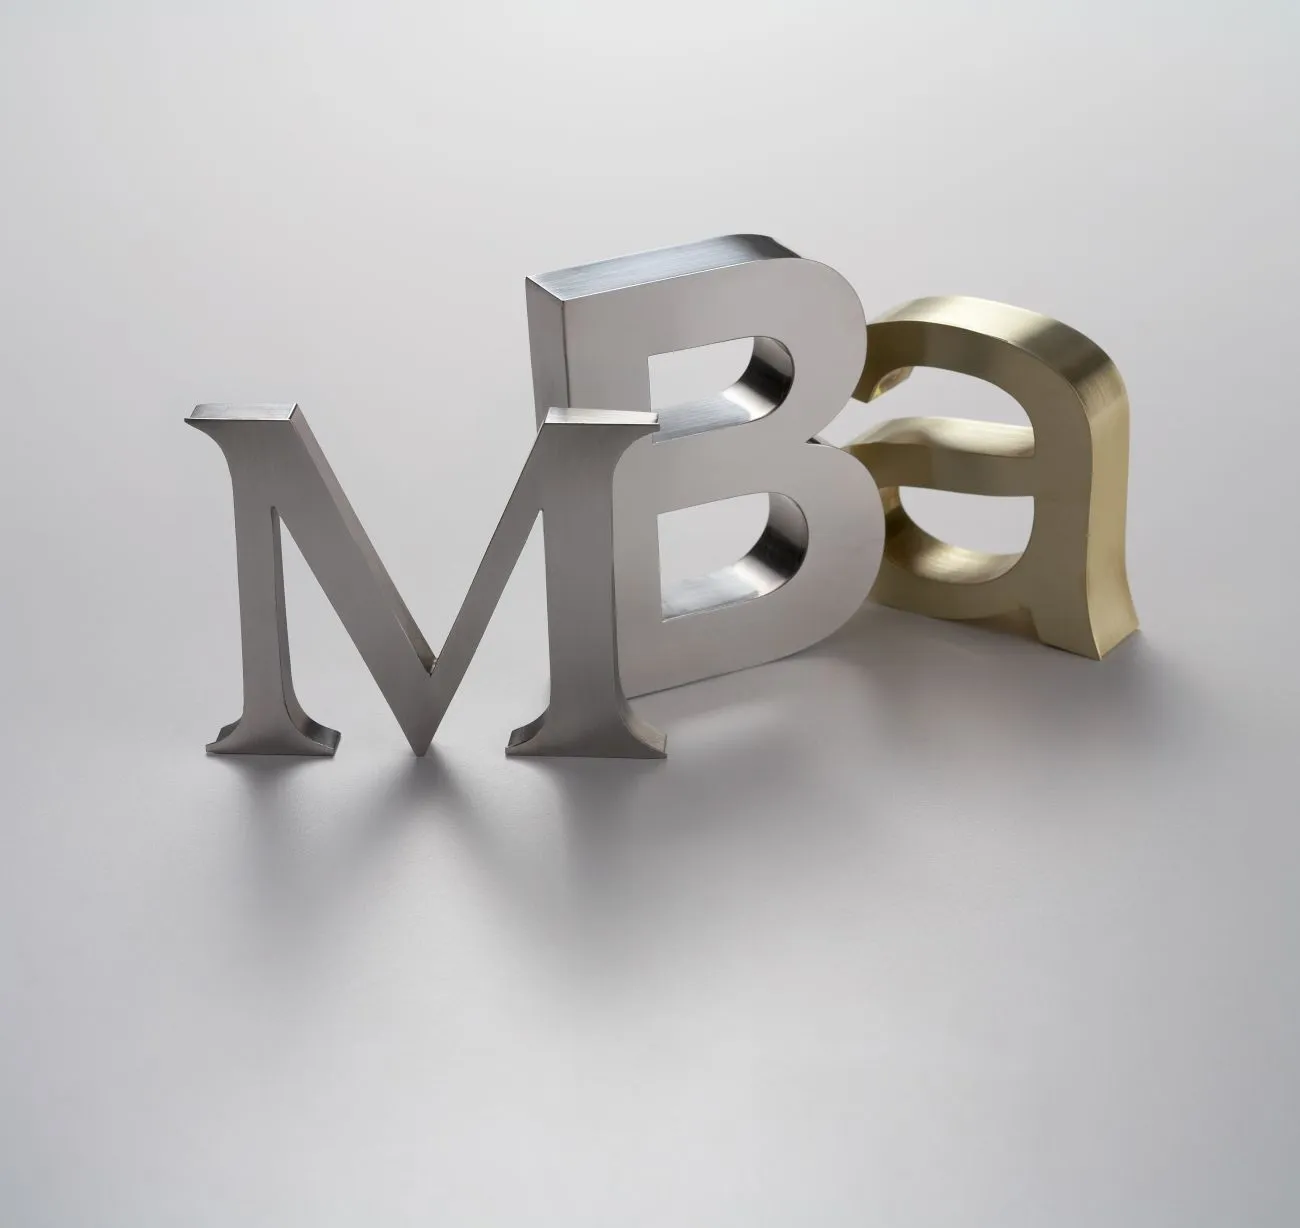 15 Reasons Why You Should Get an MBA